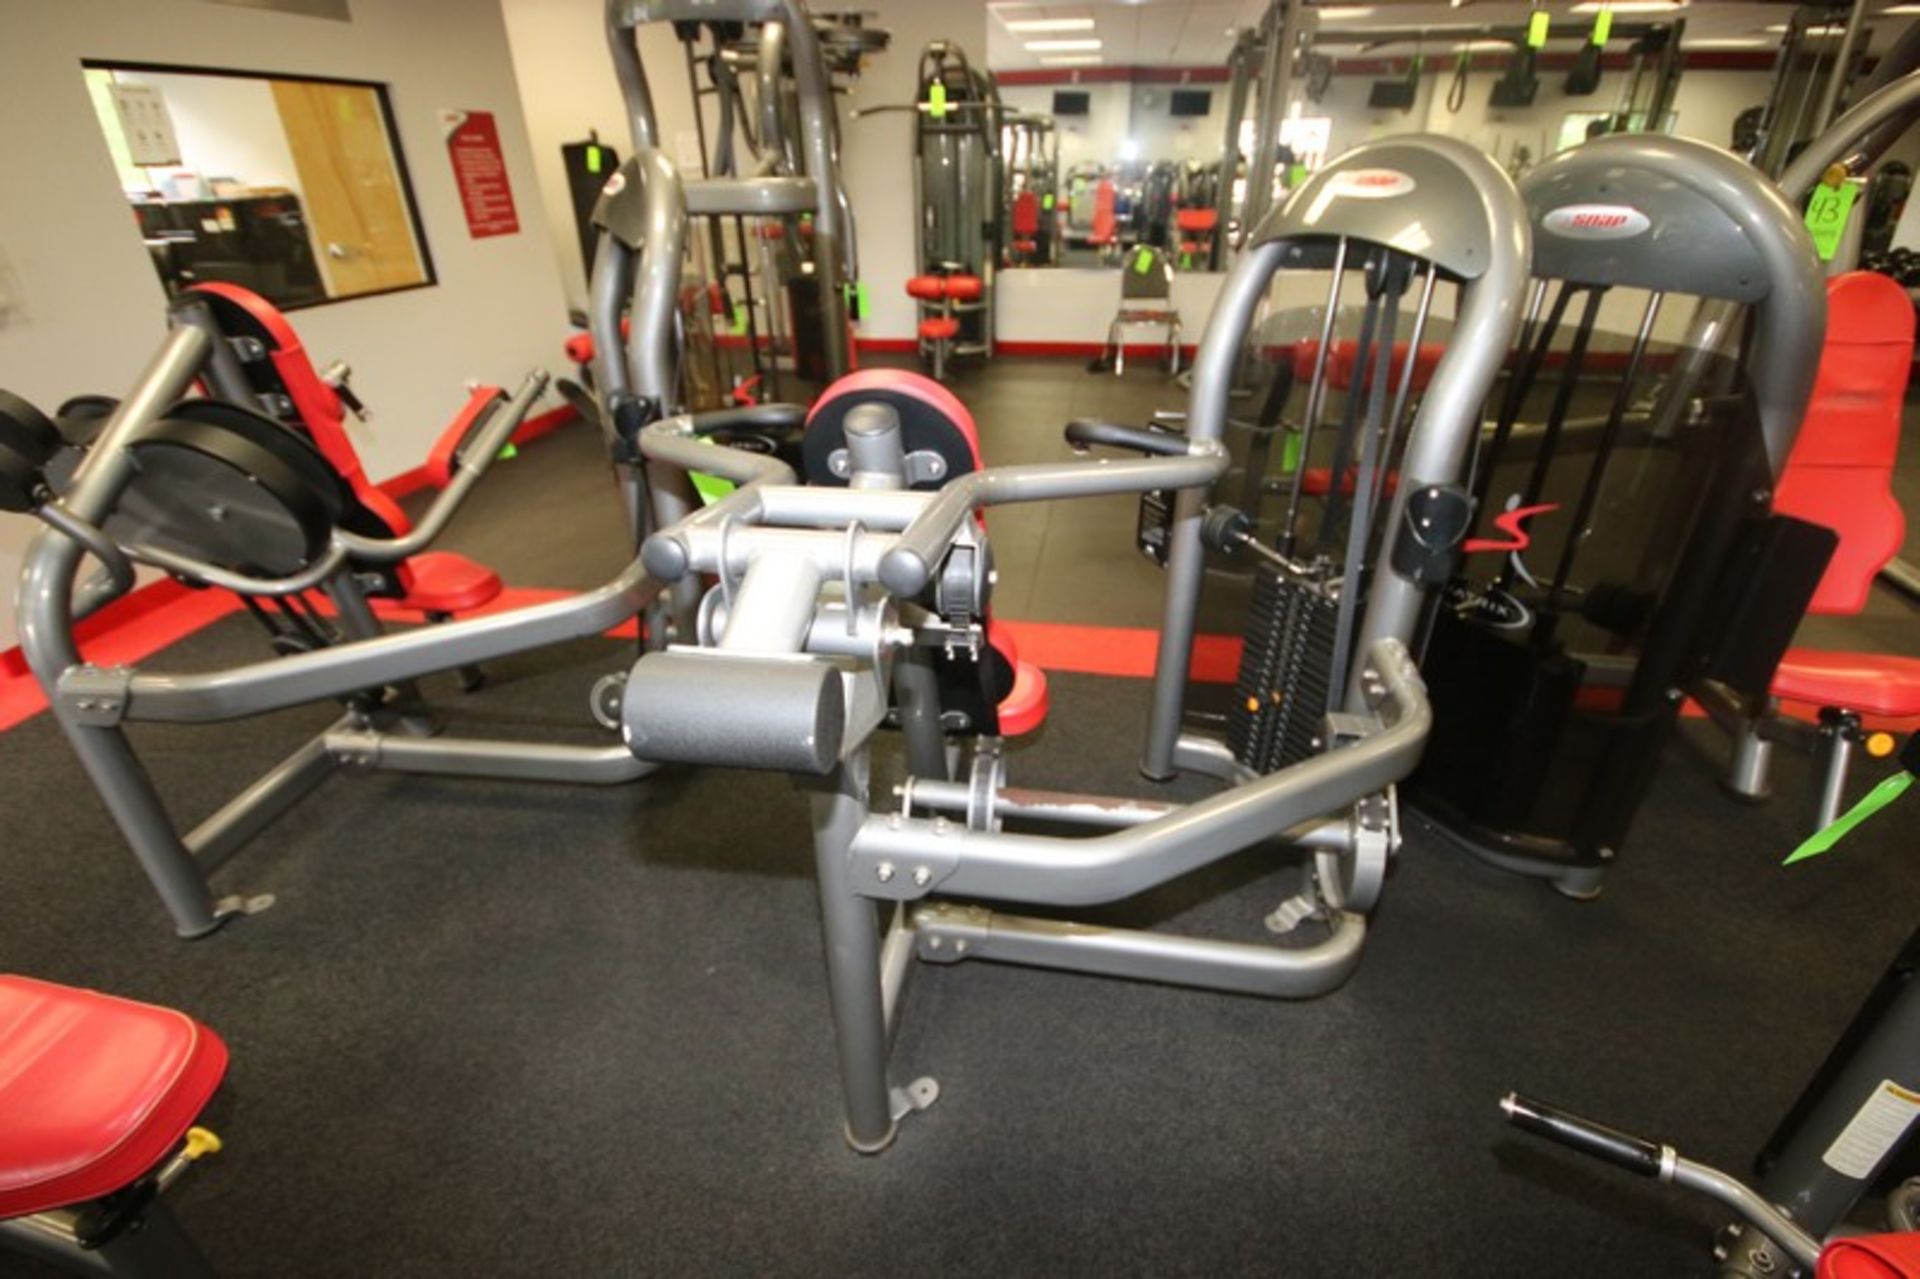 Matrix Shoulder Press Cable Machine, 10-200 lbs. Weight Range on Plates, Overall Dims.: Aprox. 55" L - Image 5 of 5